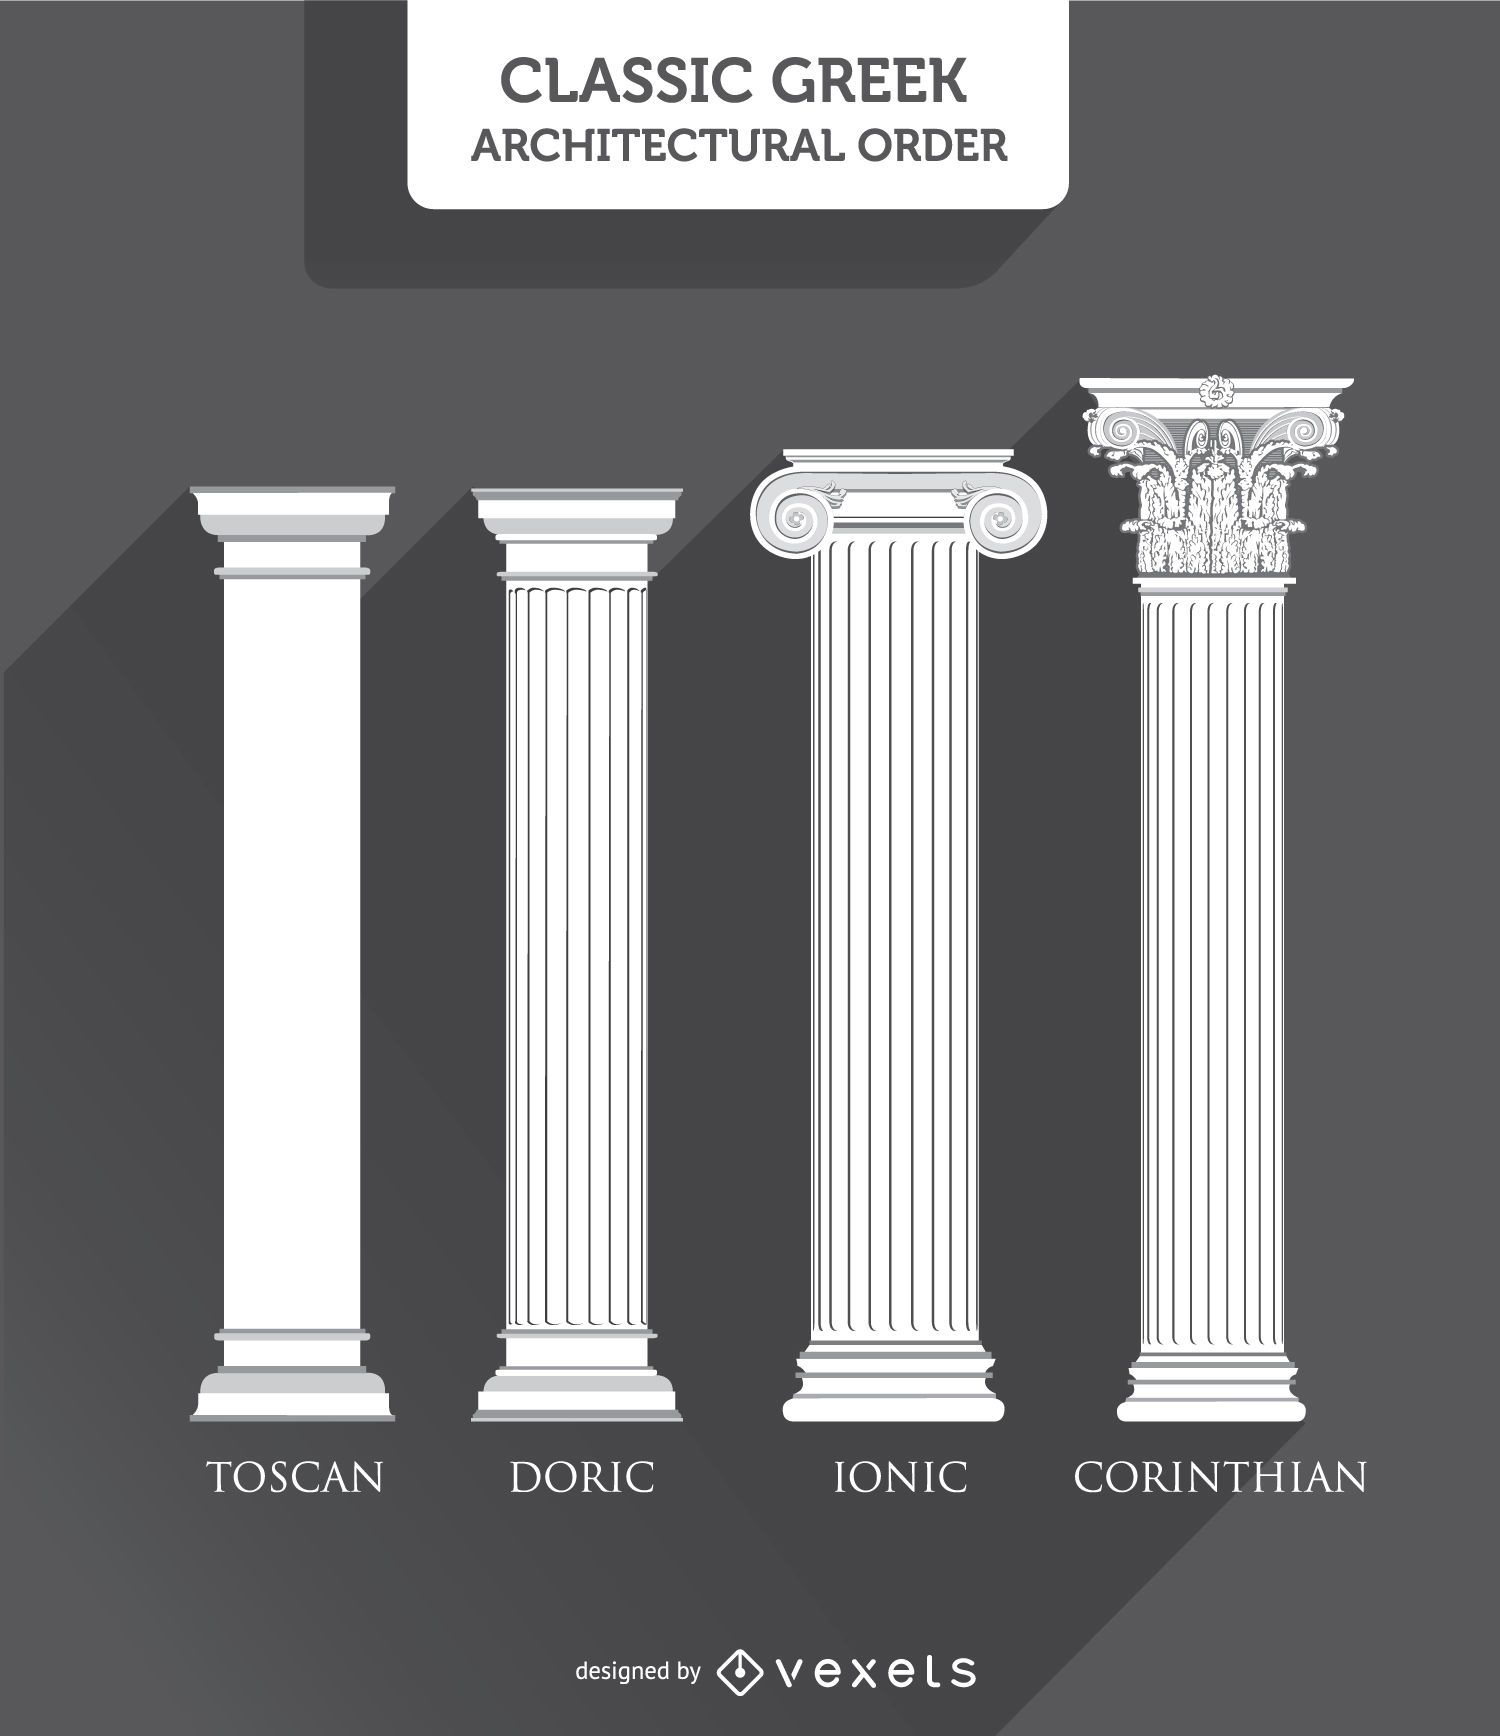 the doric ionic and corinthian styles are known as the